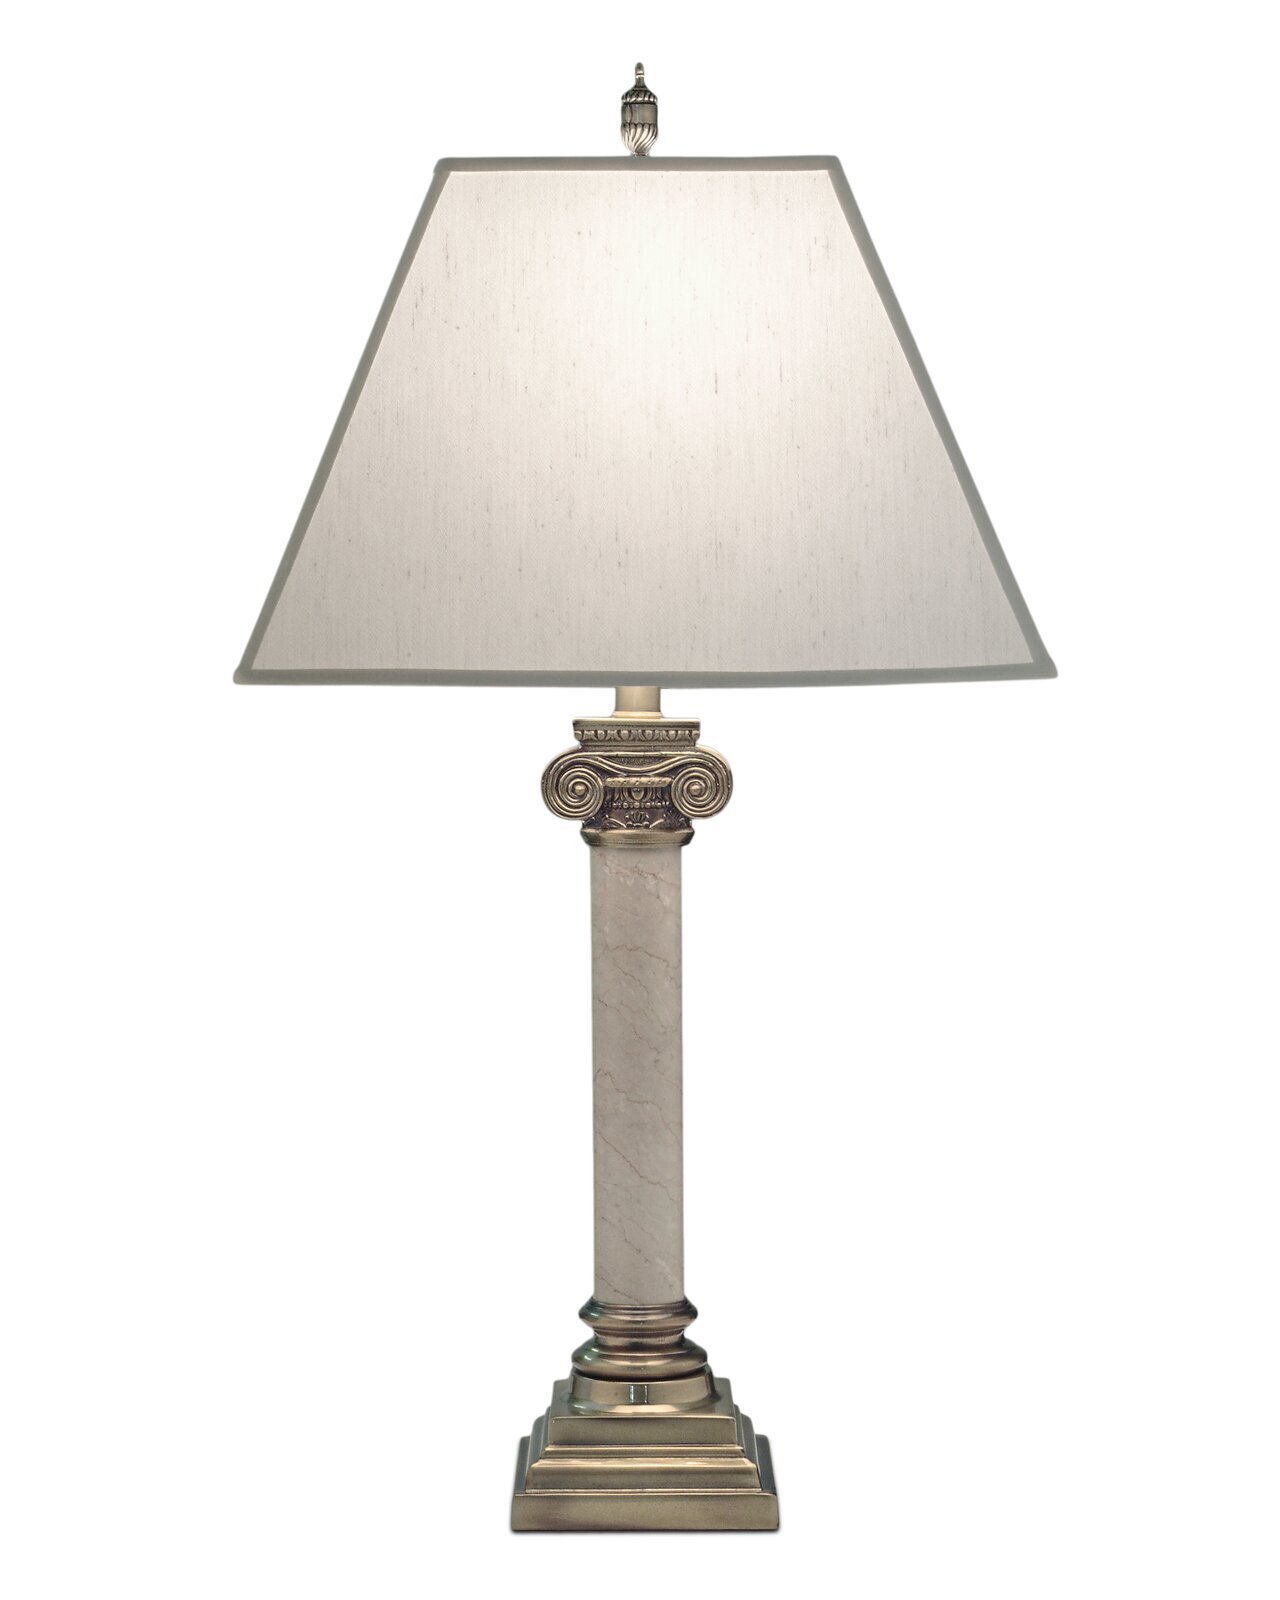 Antique Stiffel lamps with column style base